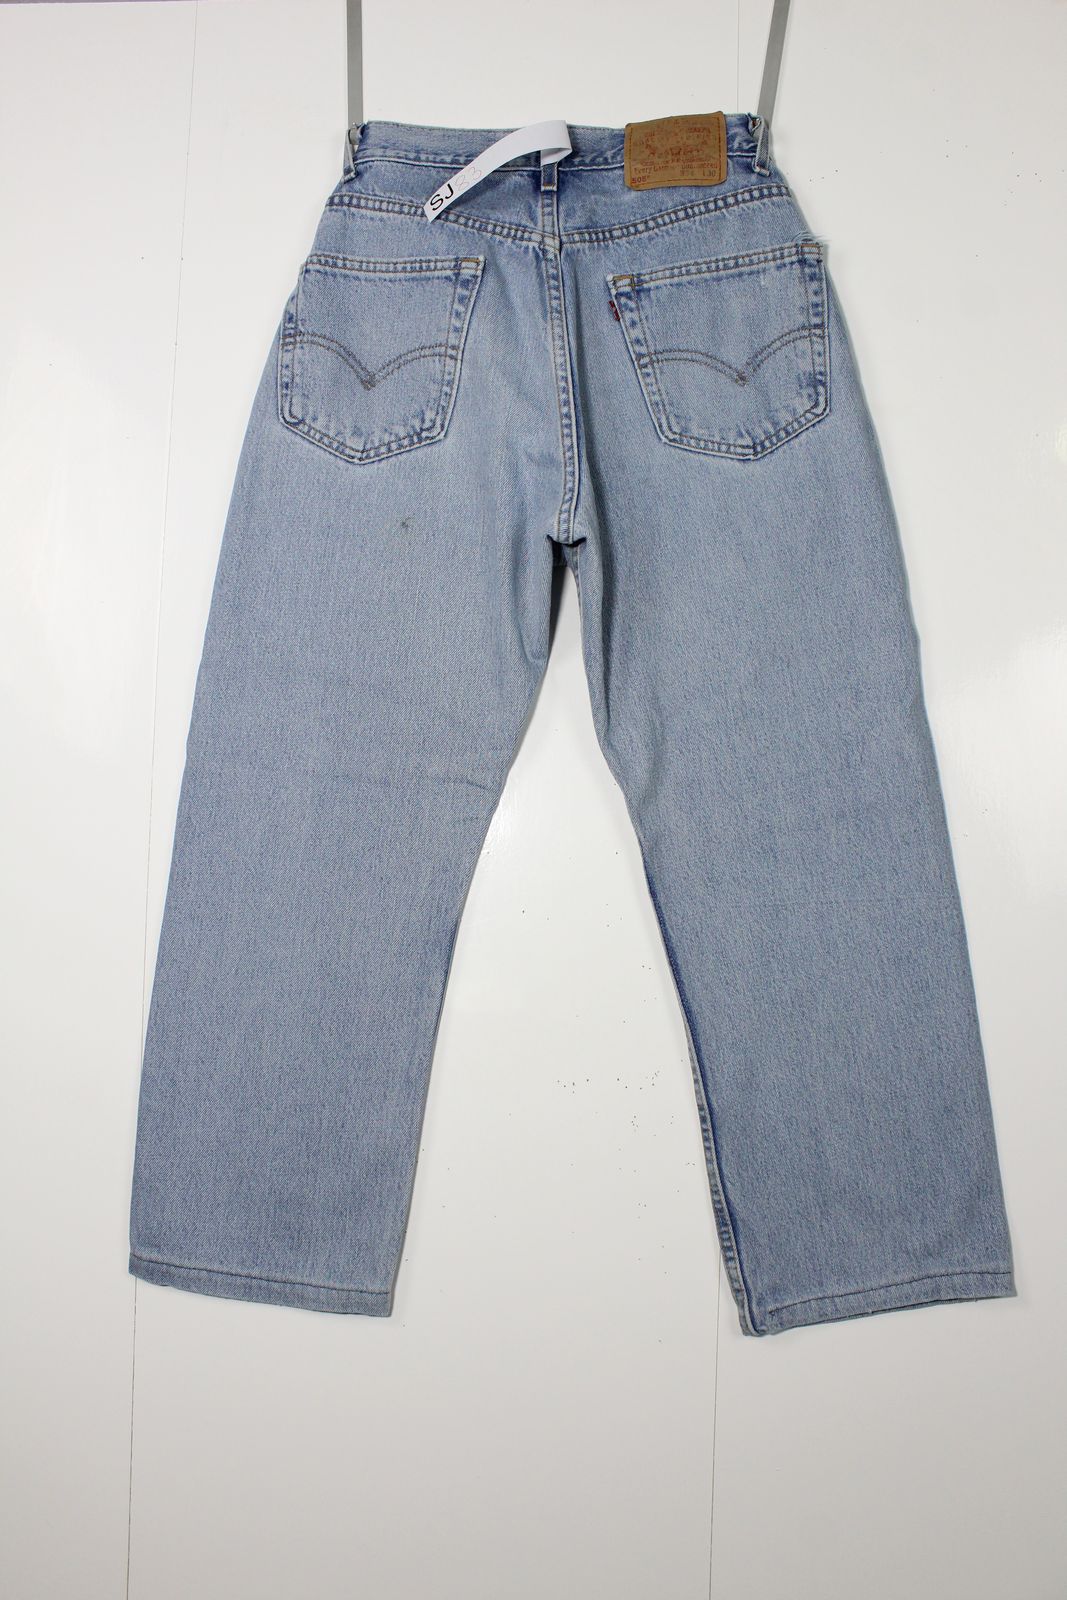 Levi's 505 Relaxed Fit Made In USA W34 L30 Jeans Vintage